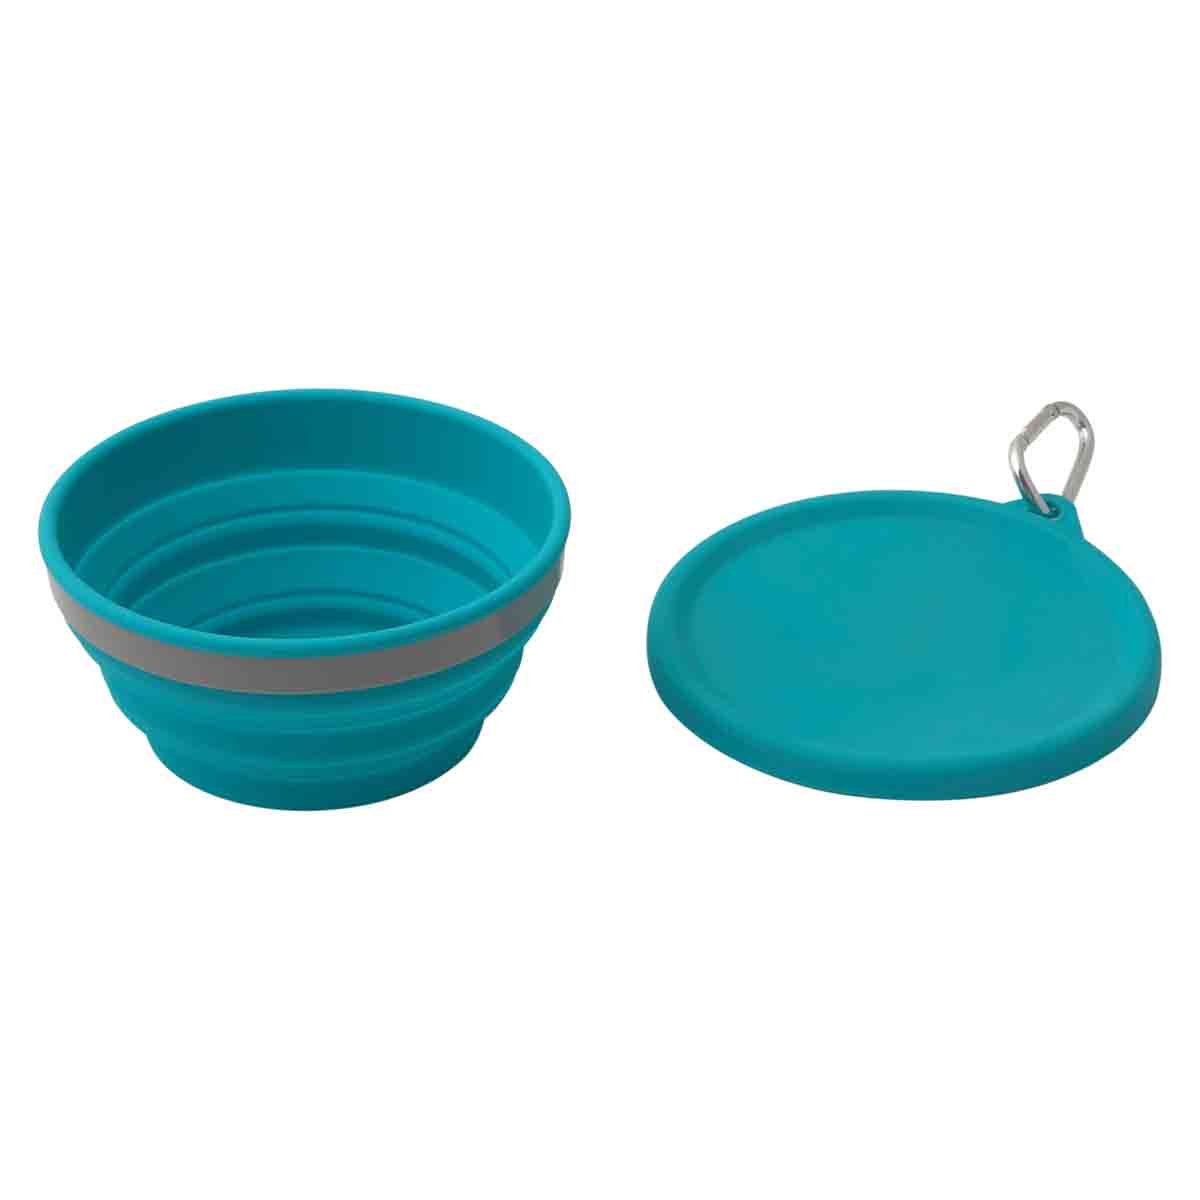 Collapsible Travel Bowl with Lid